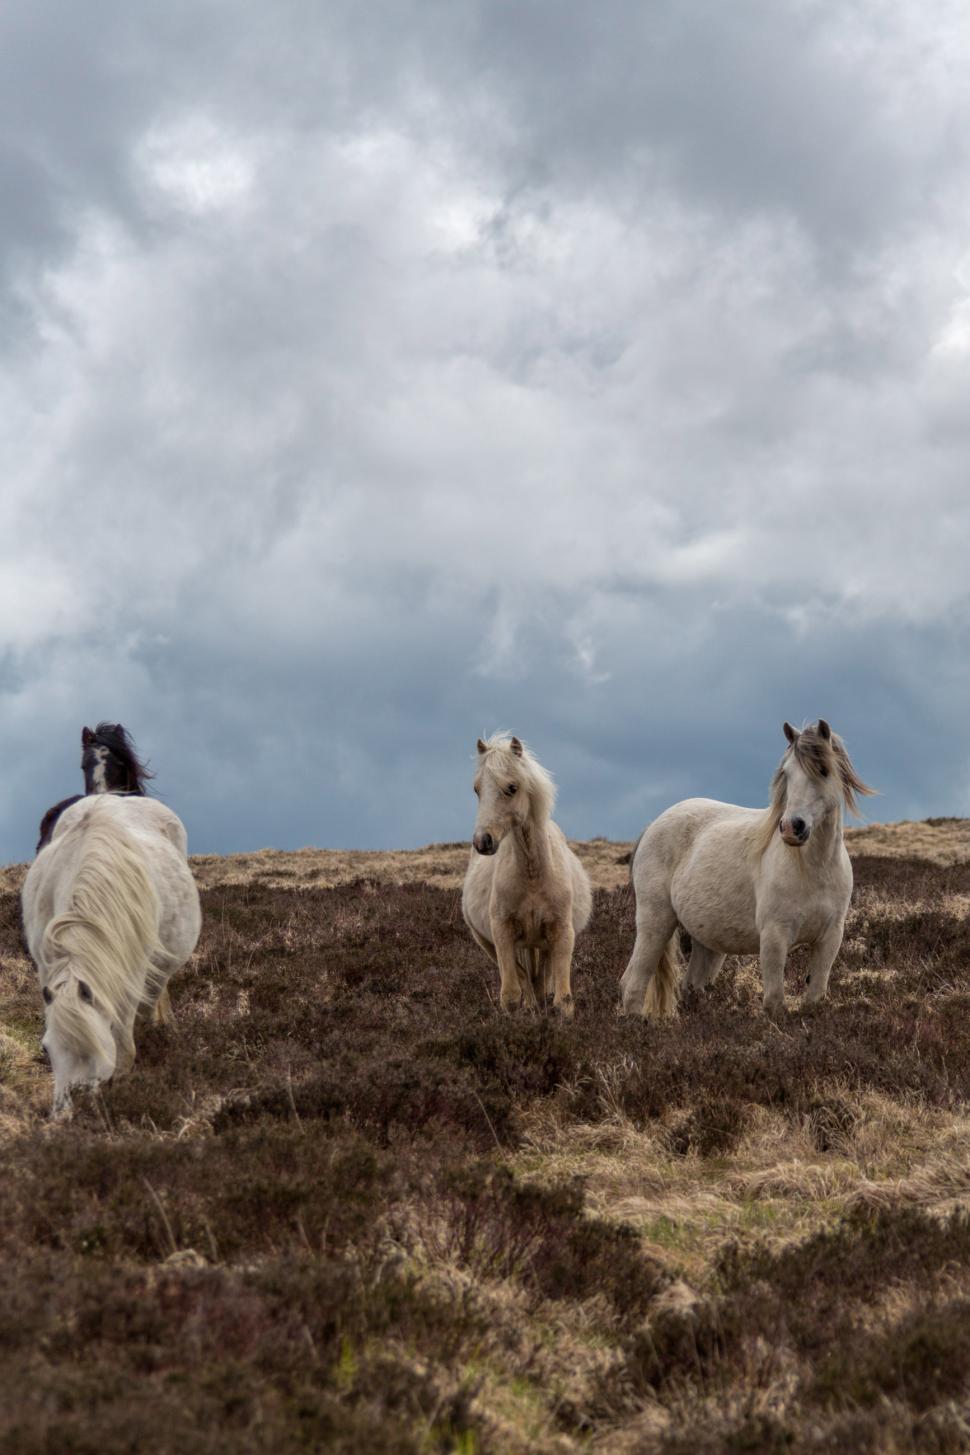 Free Image of Horses in field 